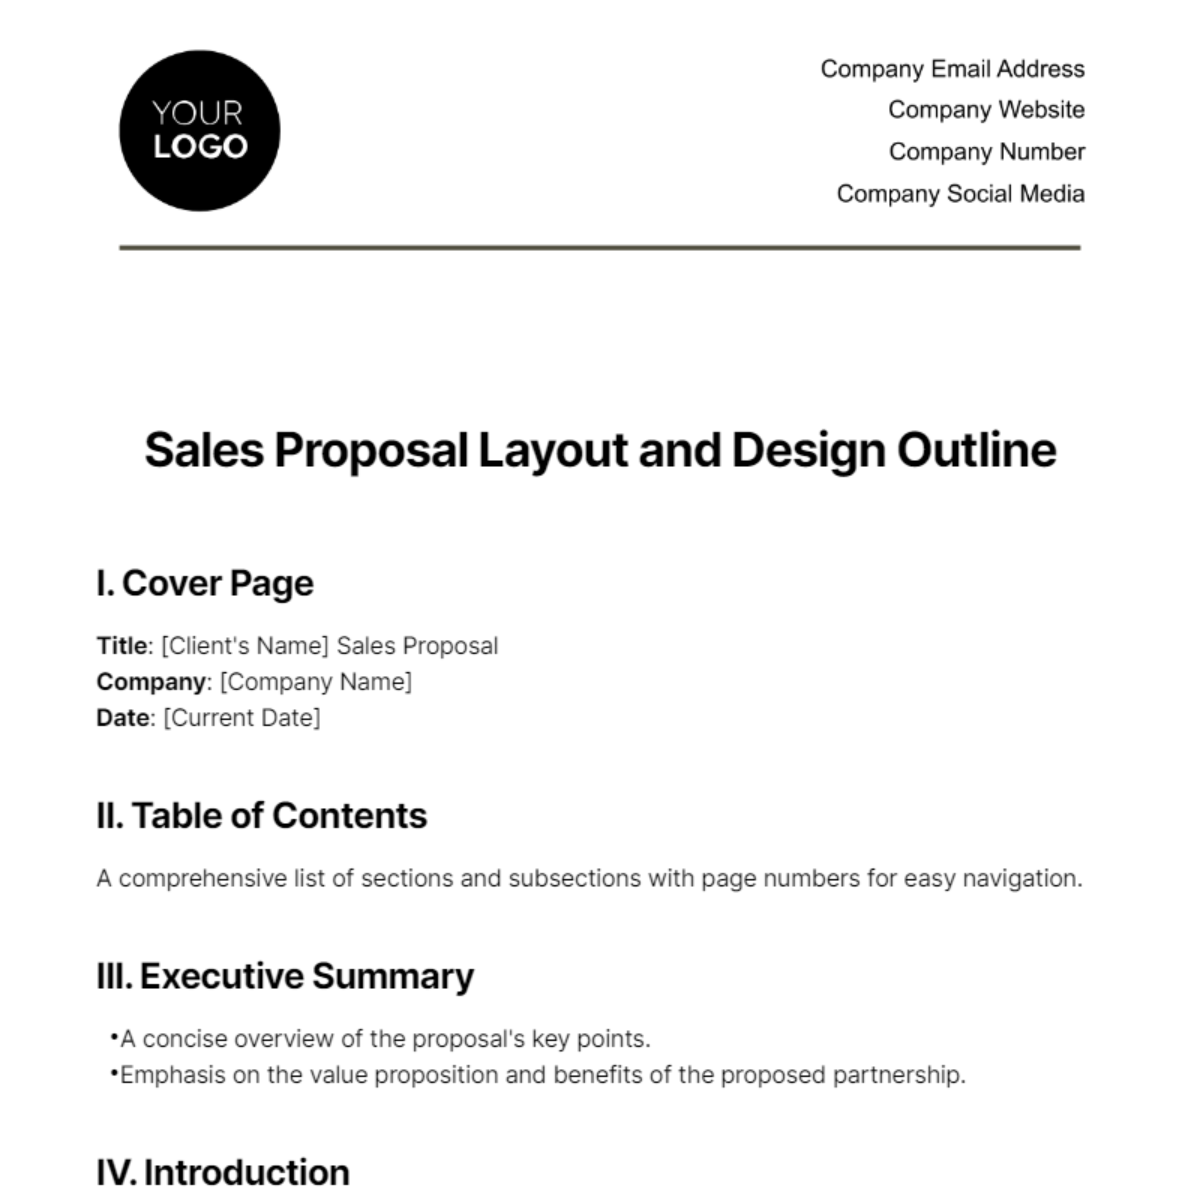 Free Sales Proposal Layout and Design Outline Template